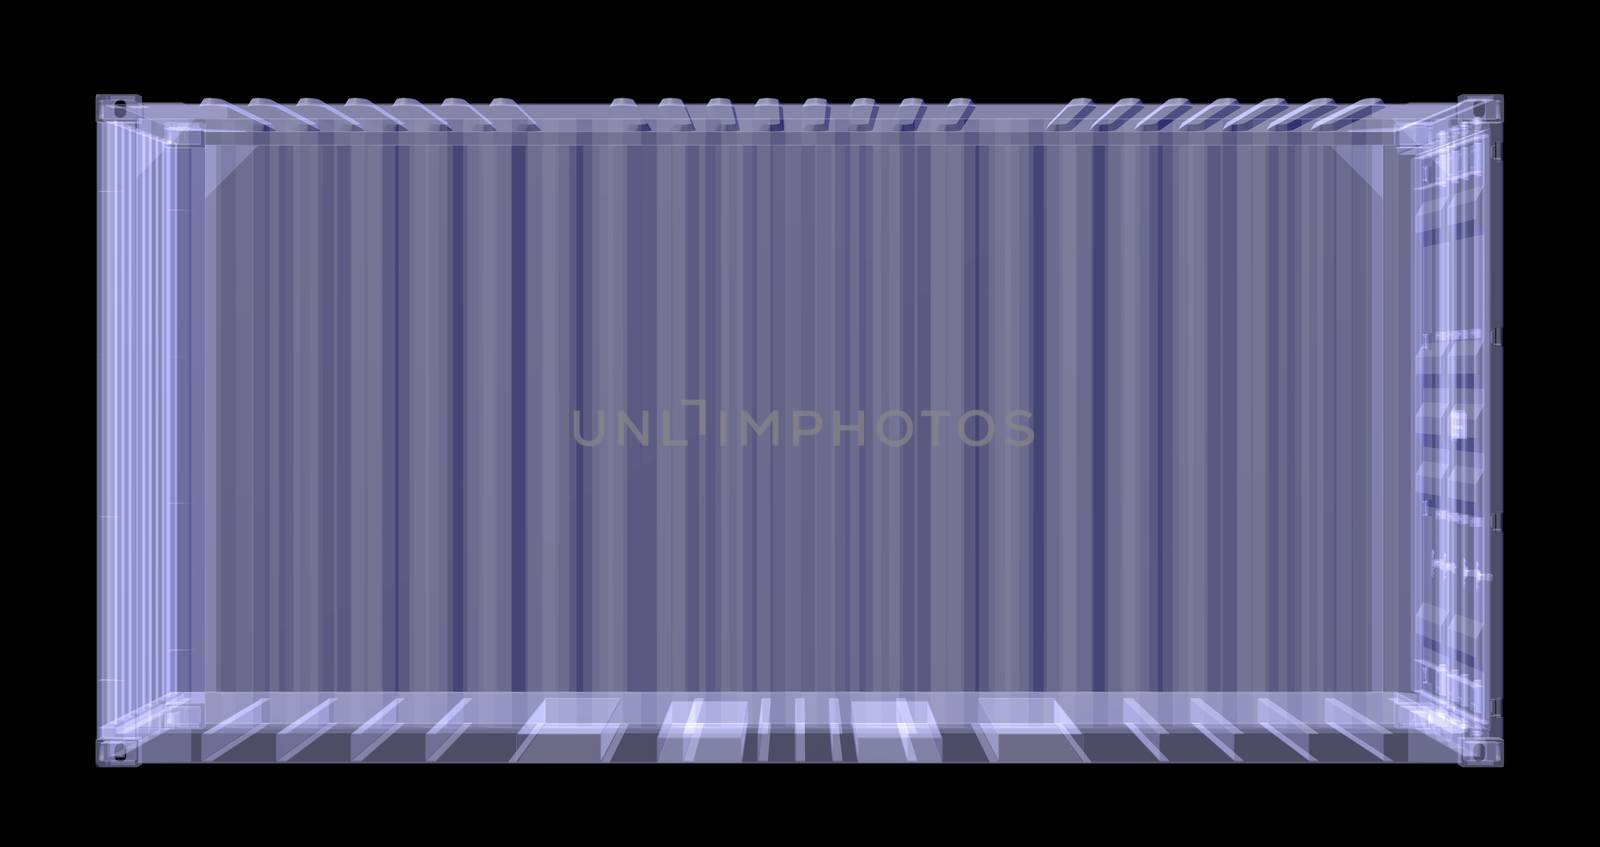 X-ray shipping container isolated on black by cherezoff